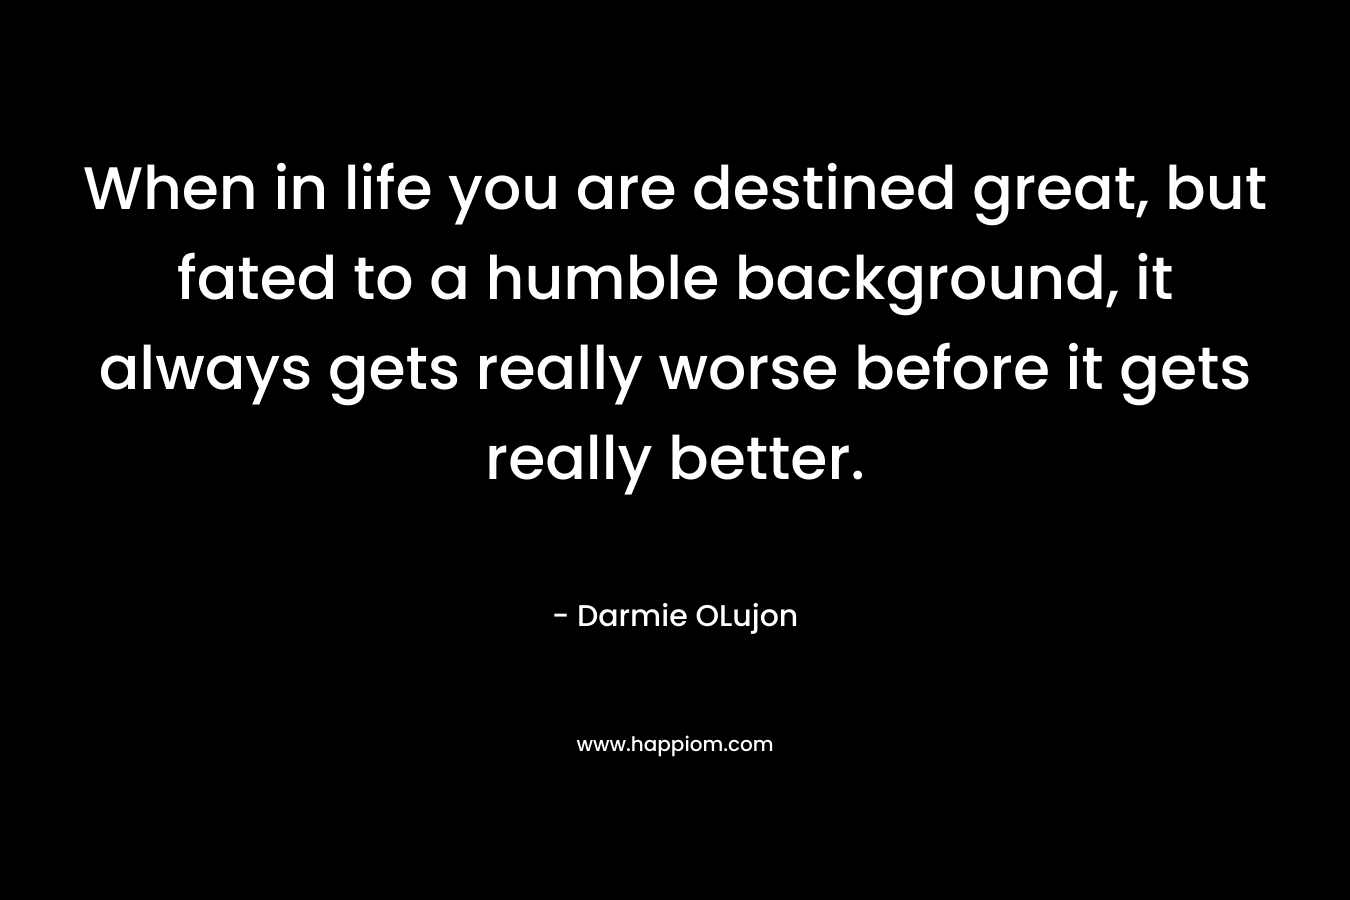 When in life you are destined great, but fated to a humble background, it always gets really worse before it gets really better.